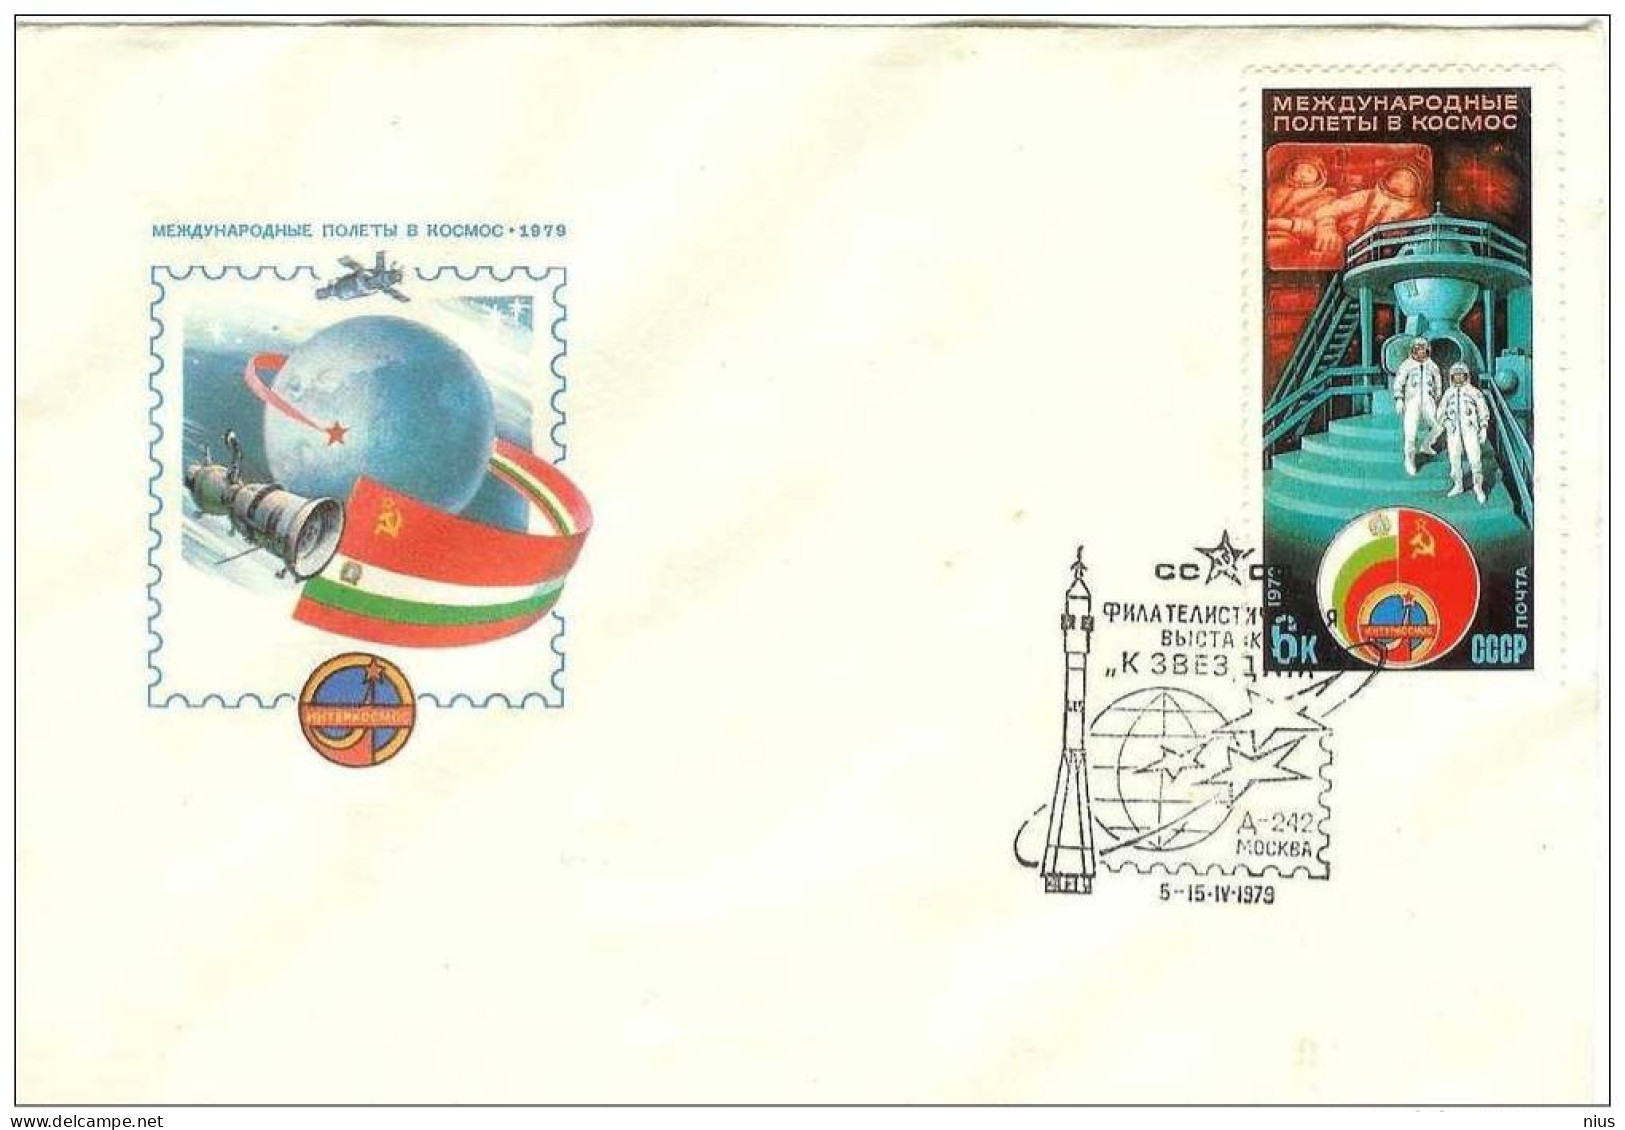 Russia USSR 1979 FDC Cosmos Rocket Space Philatelic Exhibition Moscow - FDC